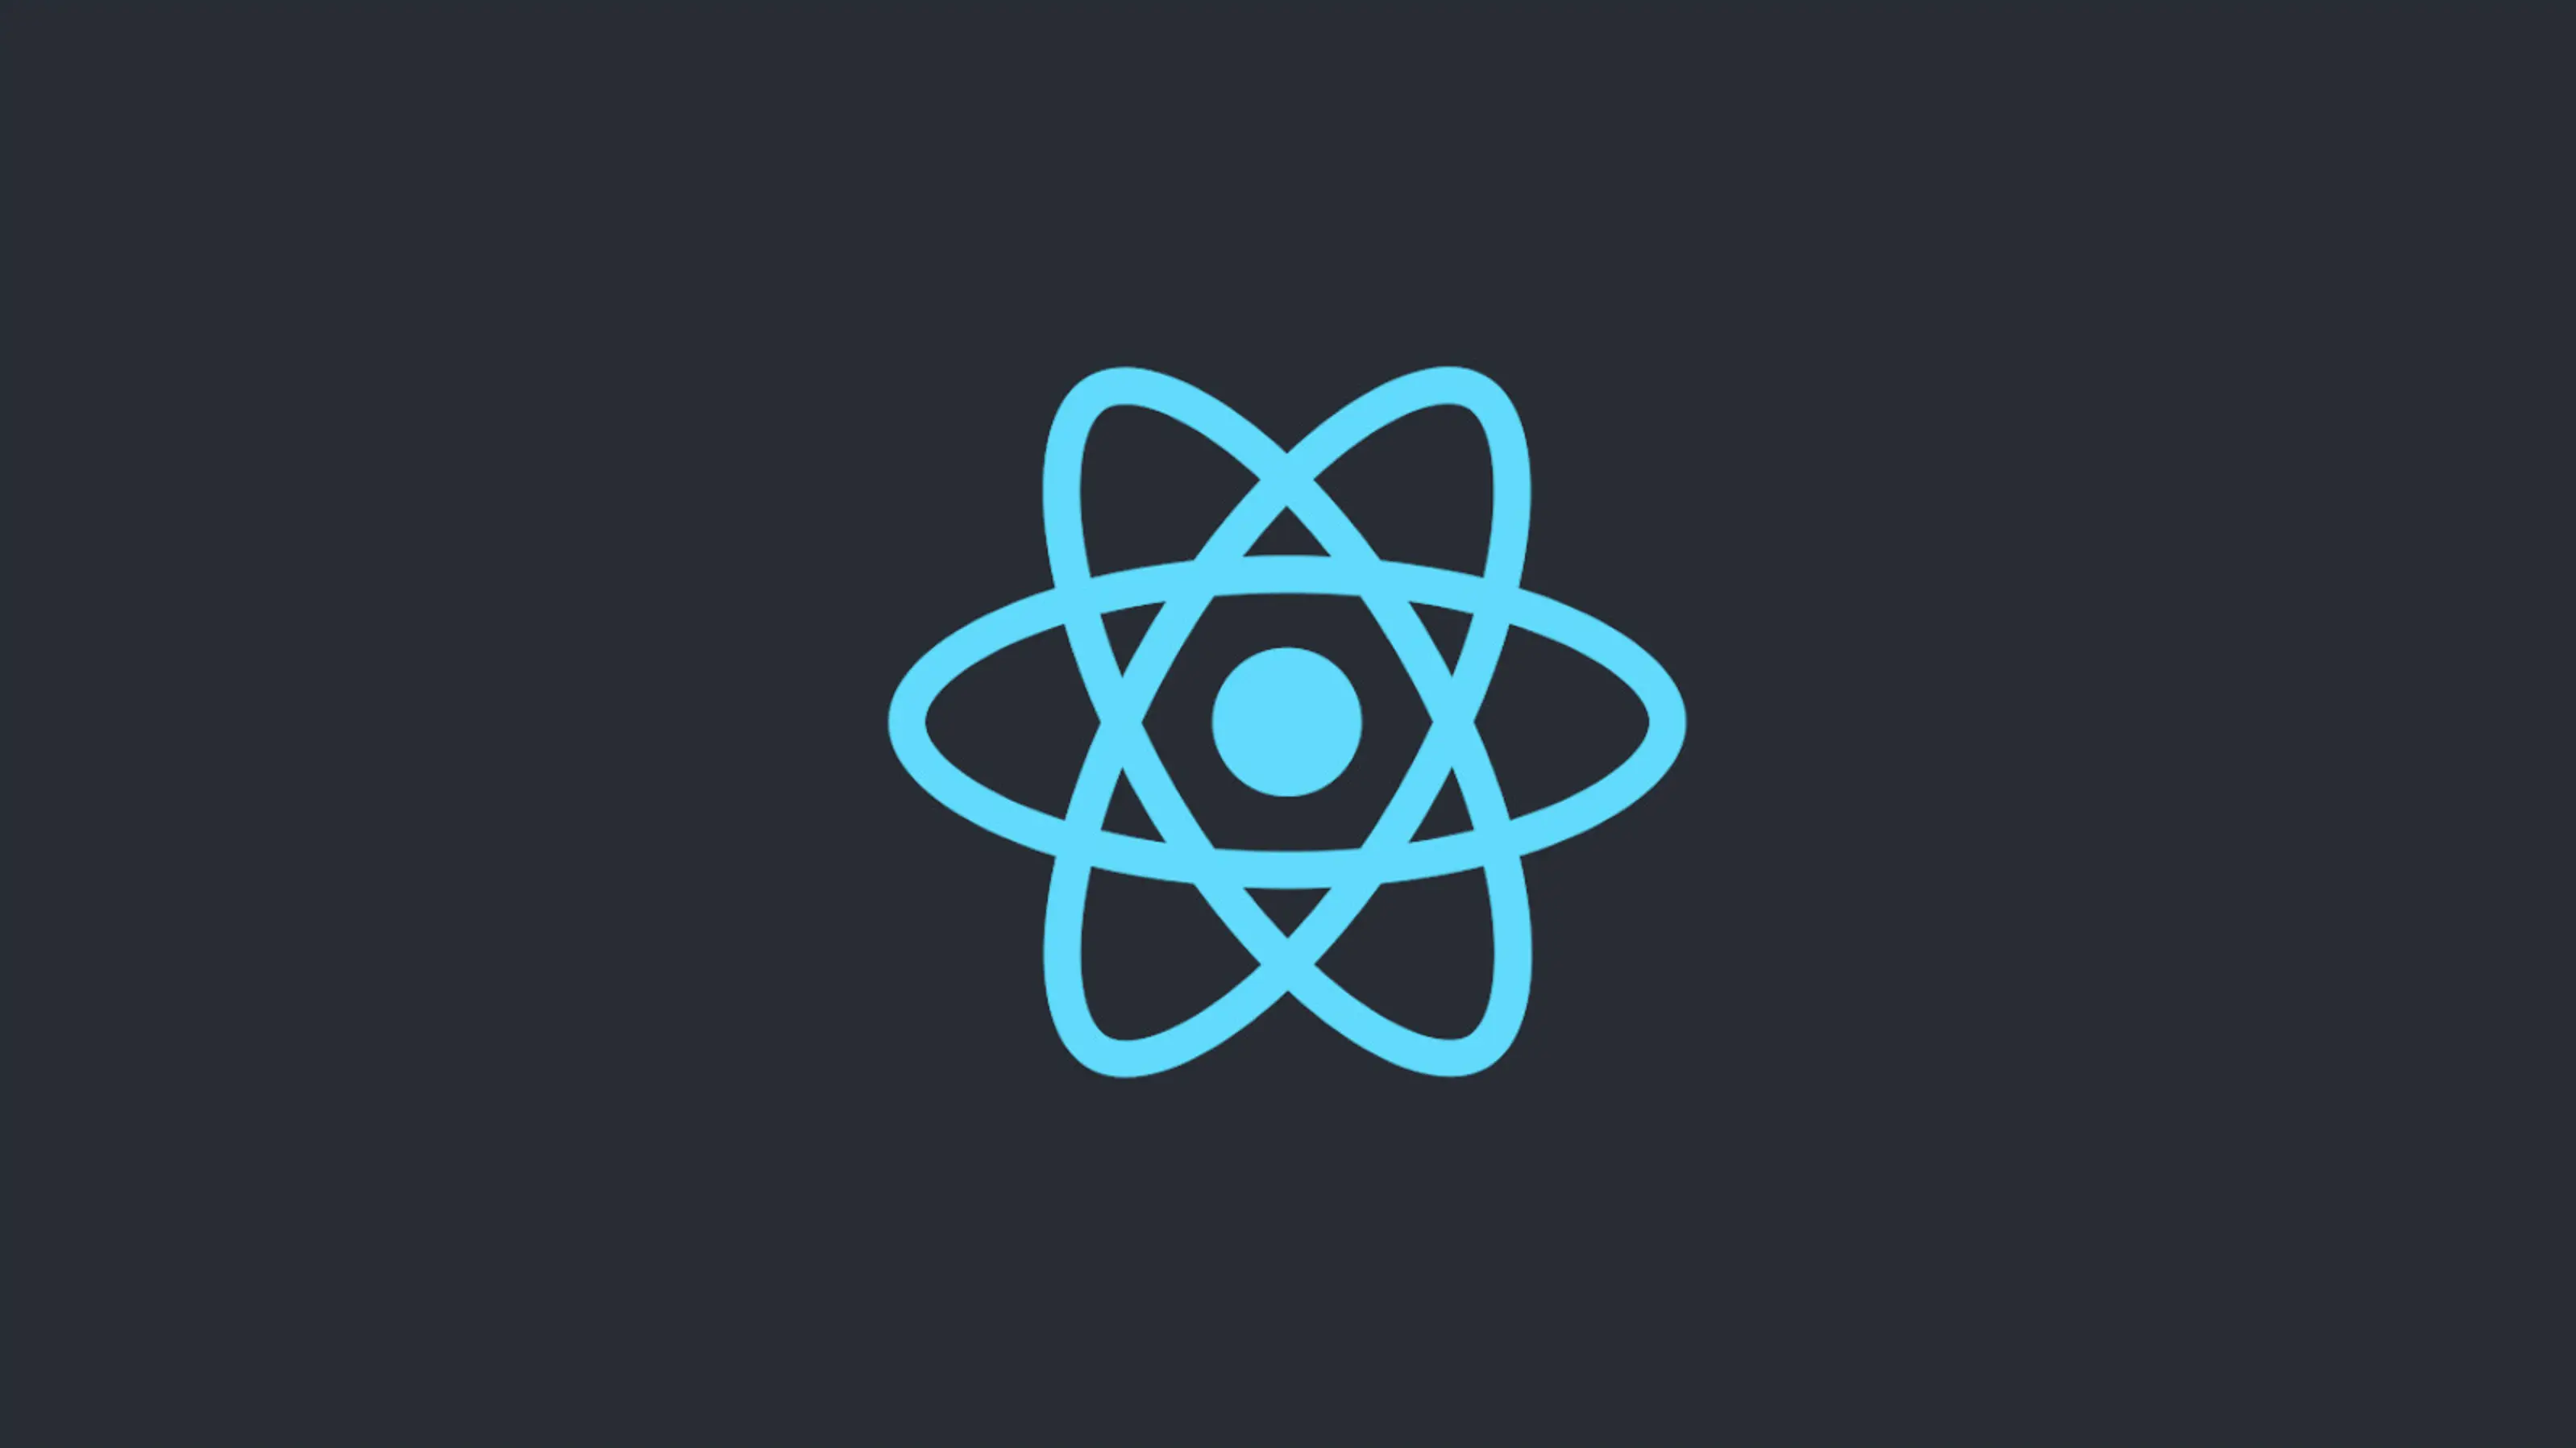 useTransition and useDeferredValue in React 18